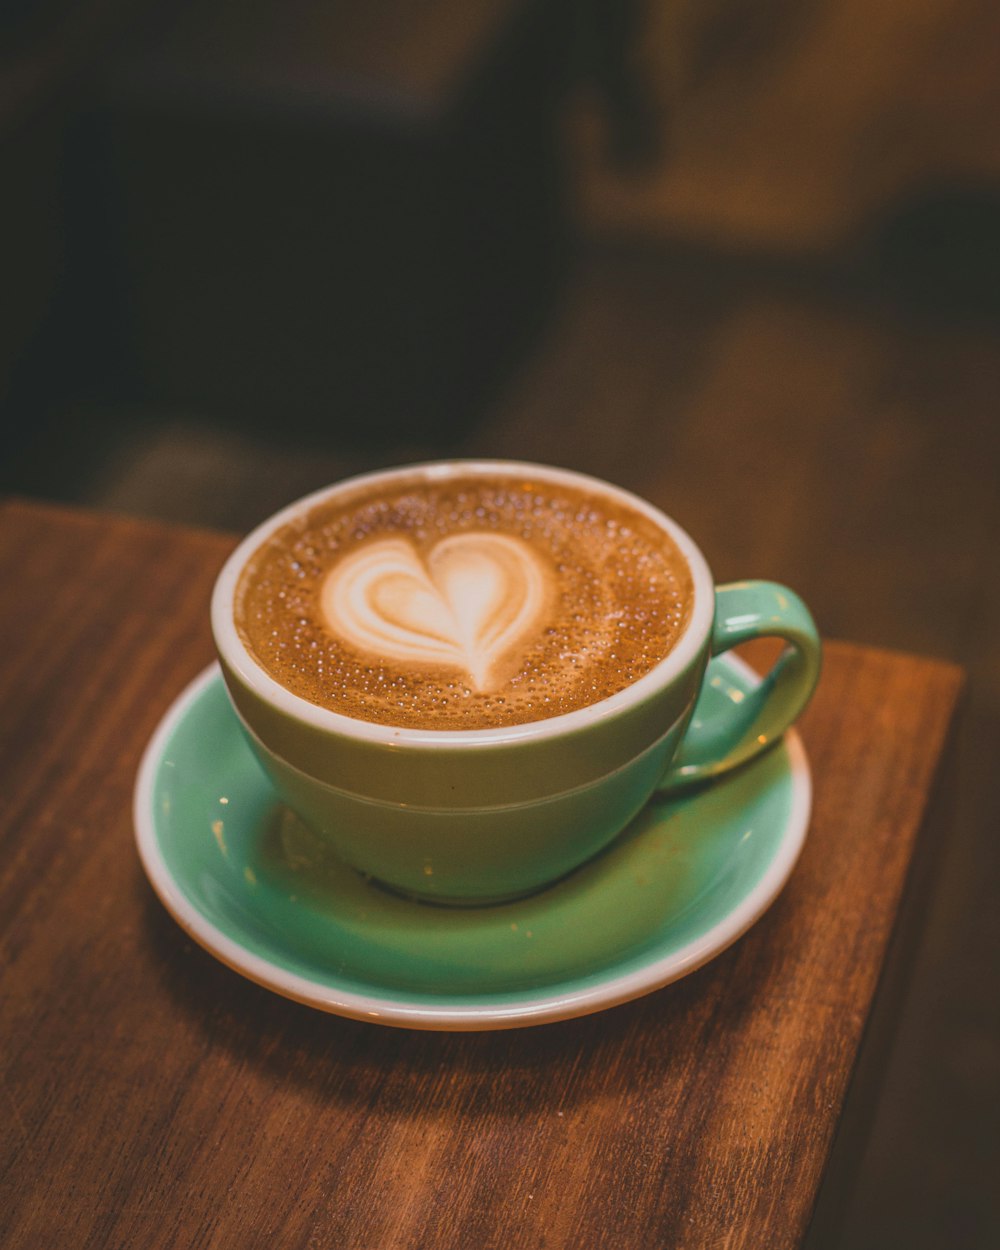 Green cup on saucer photo – Free Coffee Image on Unsplash